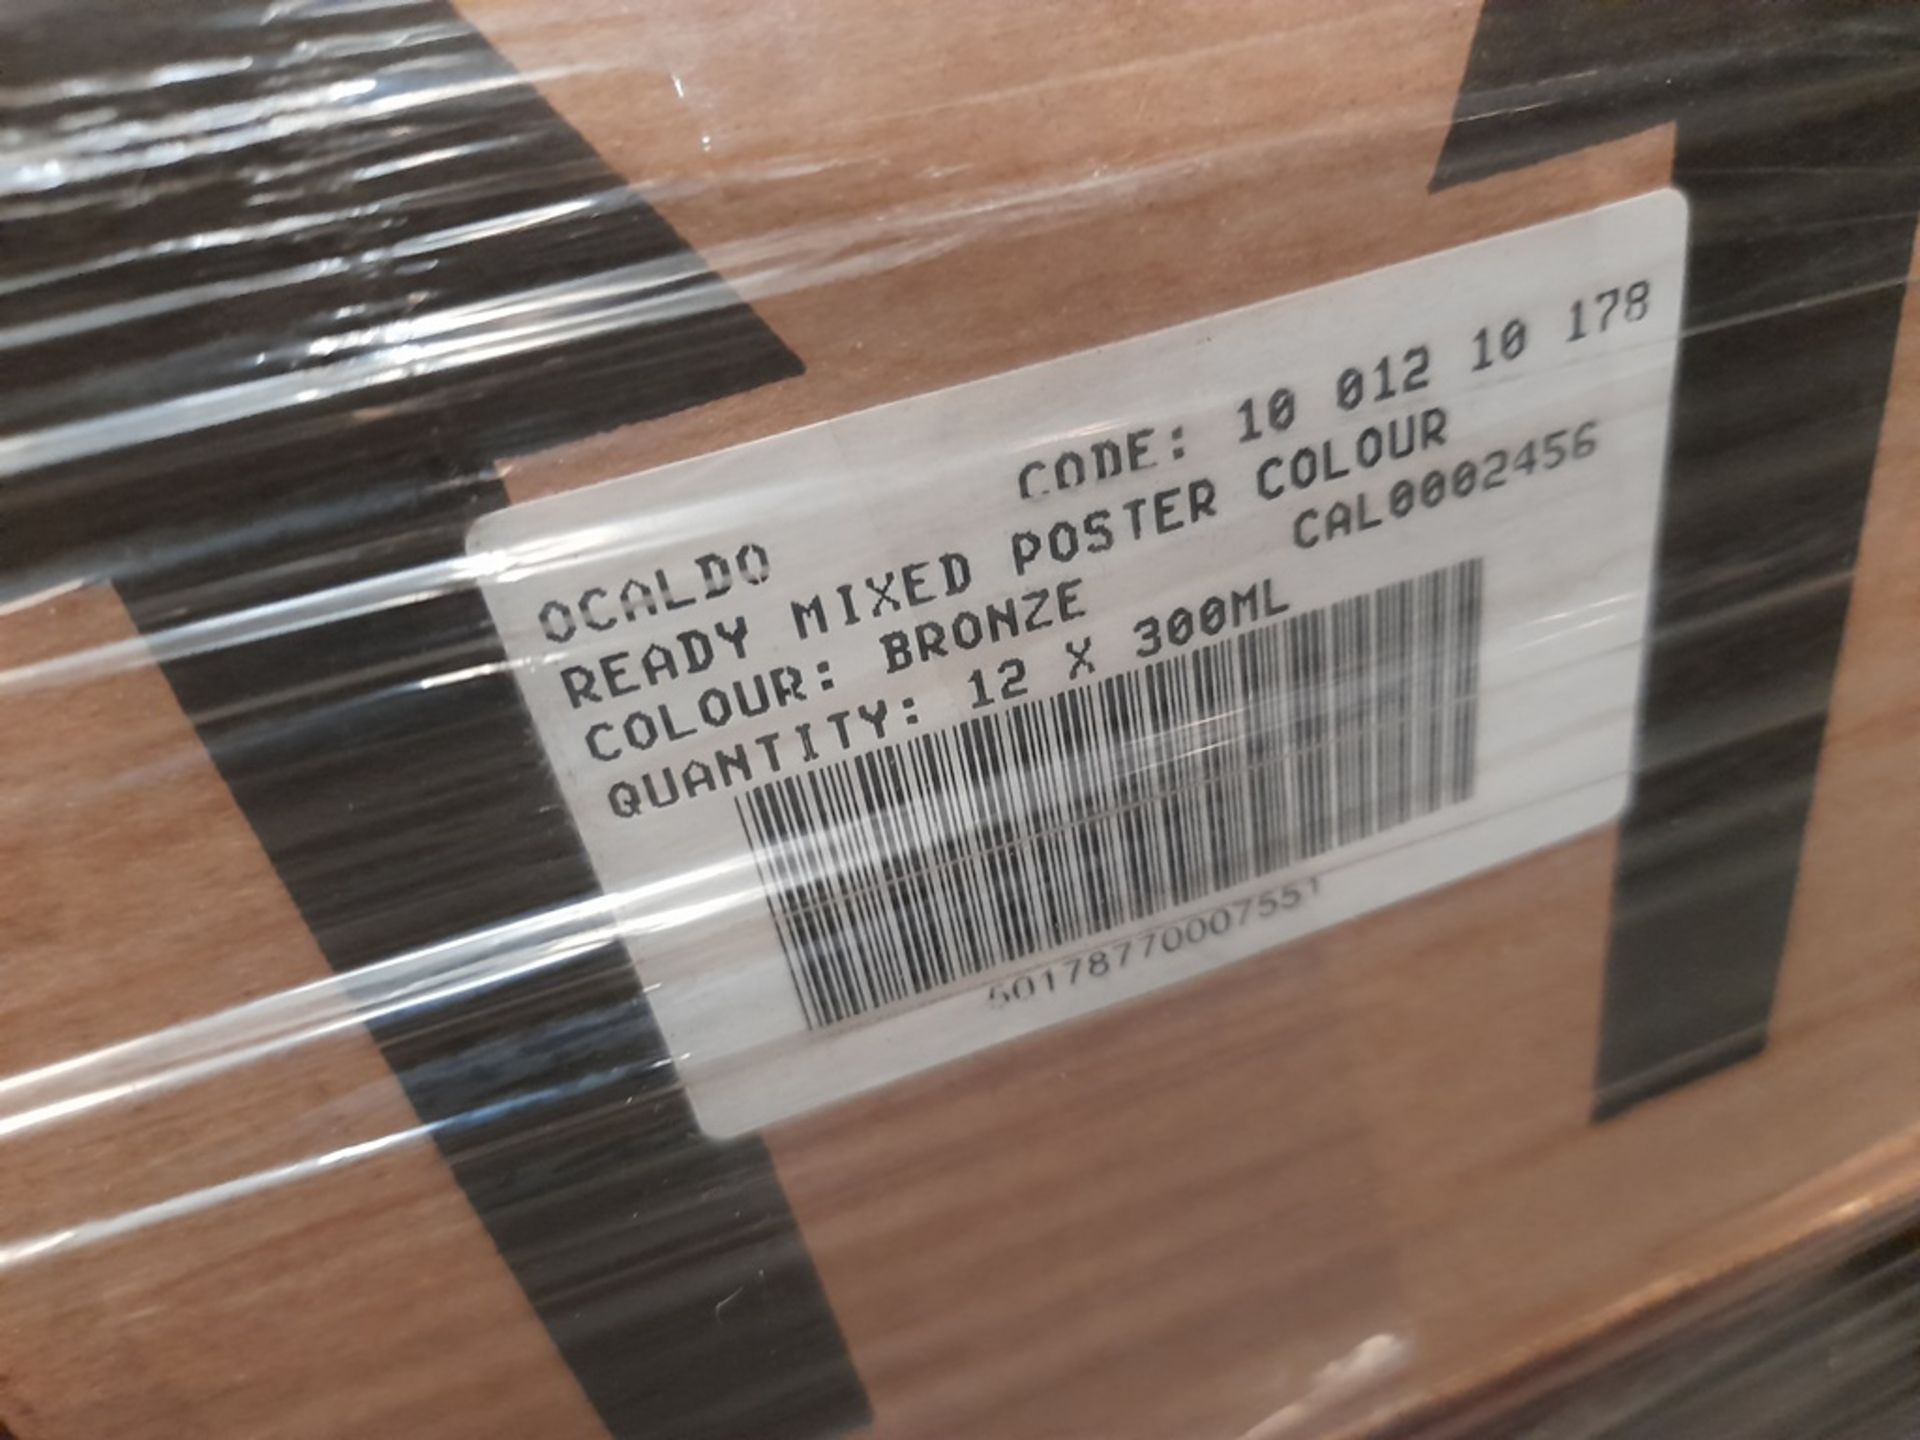 1 Pallet of Ocaldo mixed paint including glow in the dark paint, Ready Mix paint - bronze, lilac, - Image 5 of 7